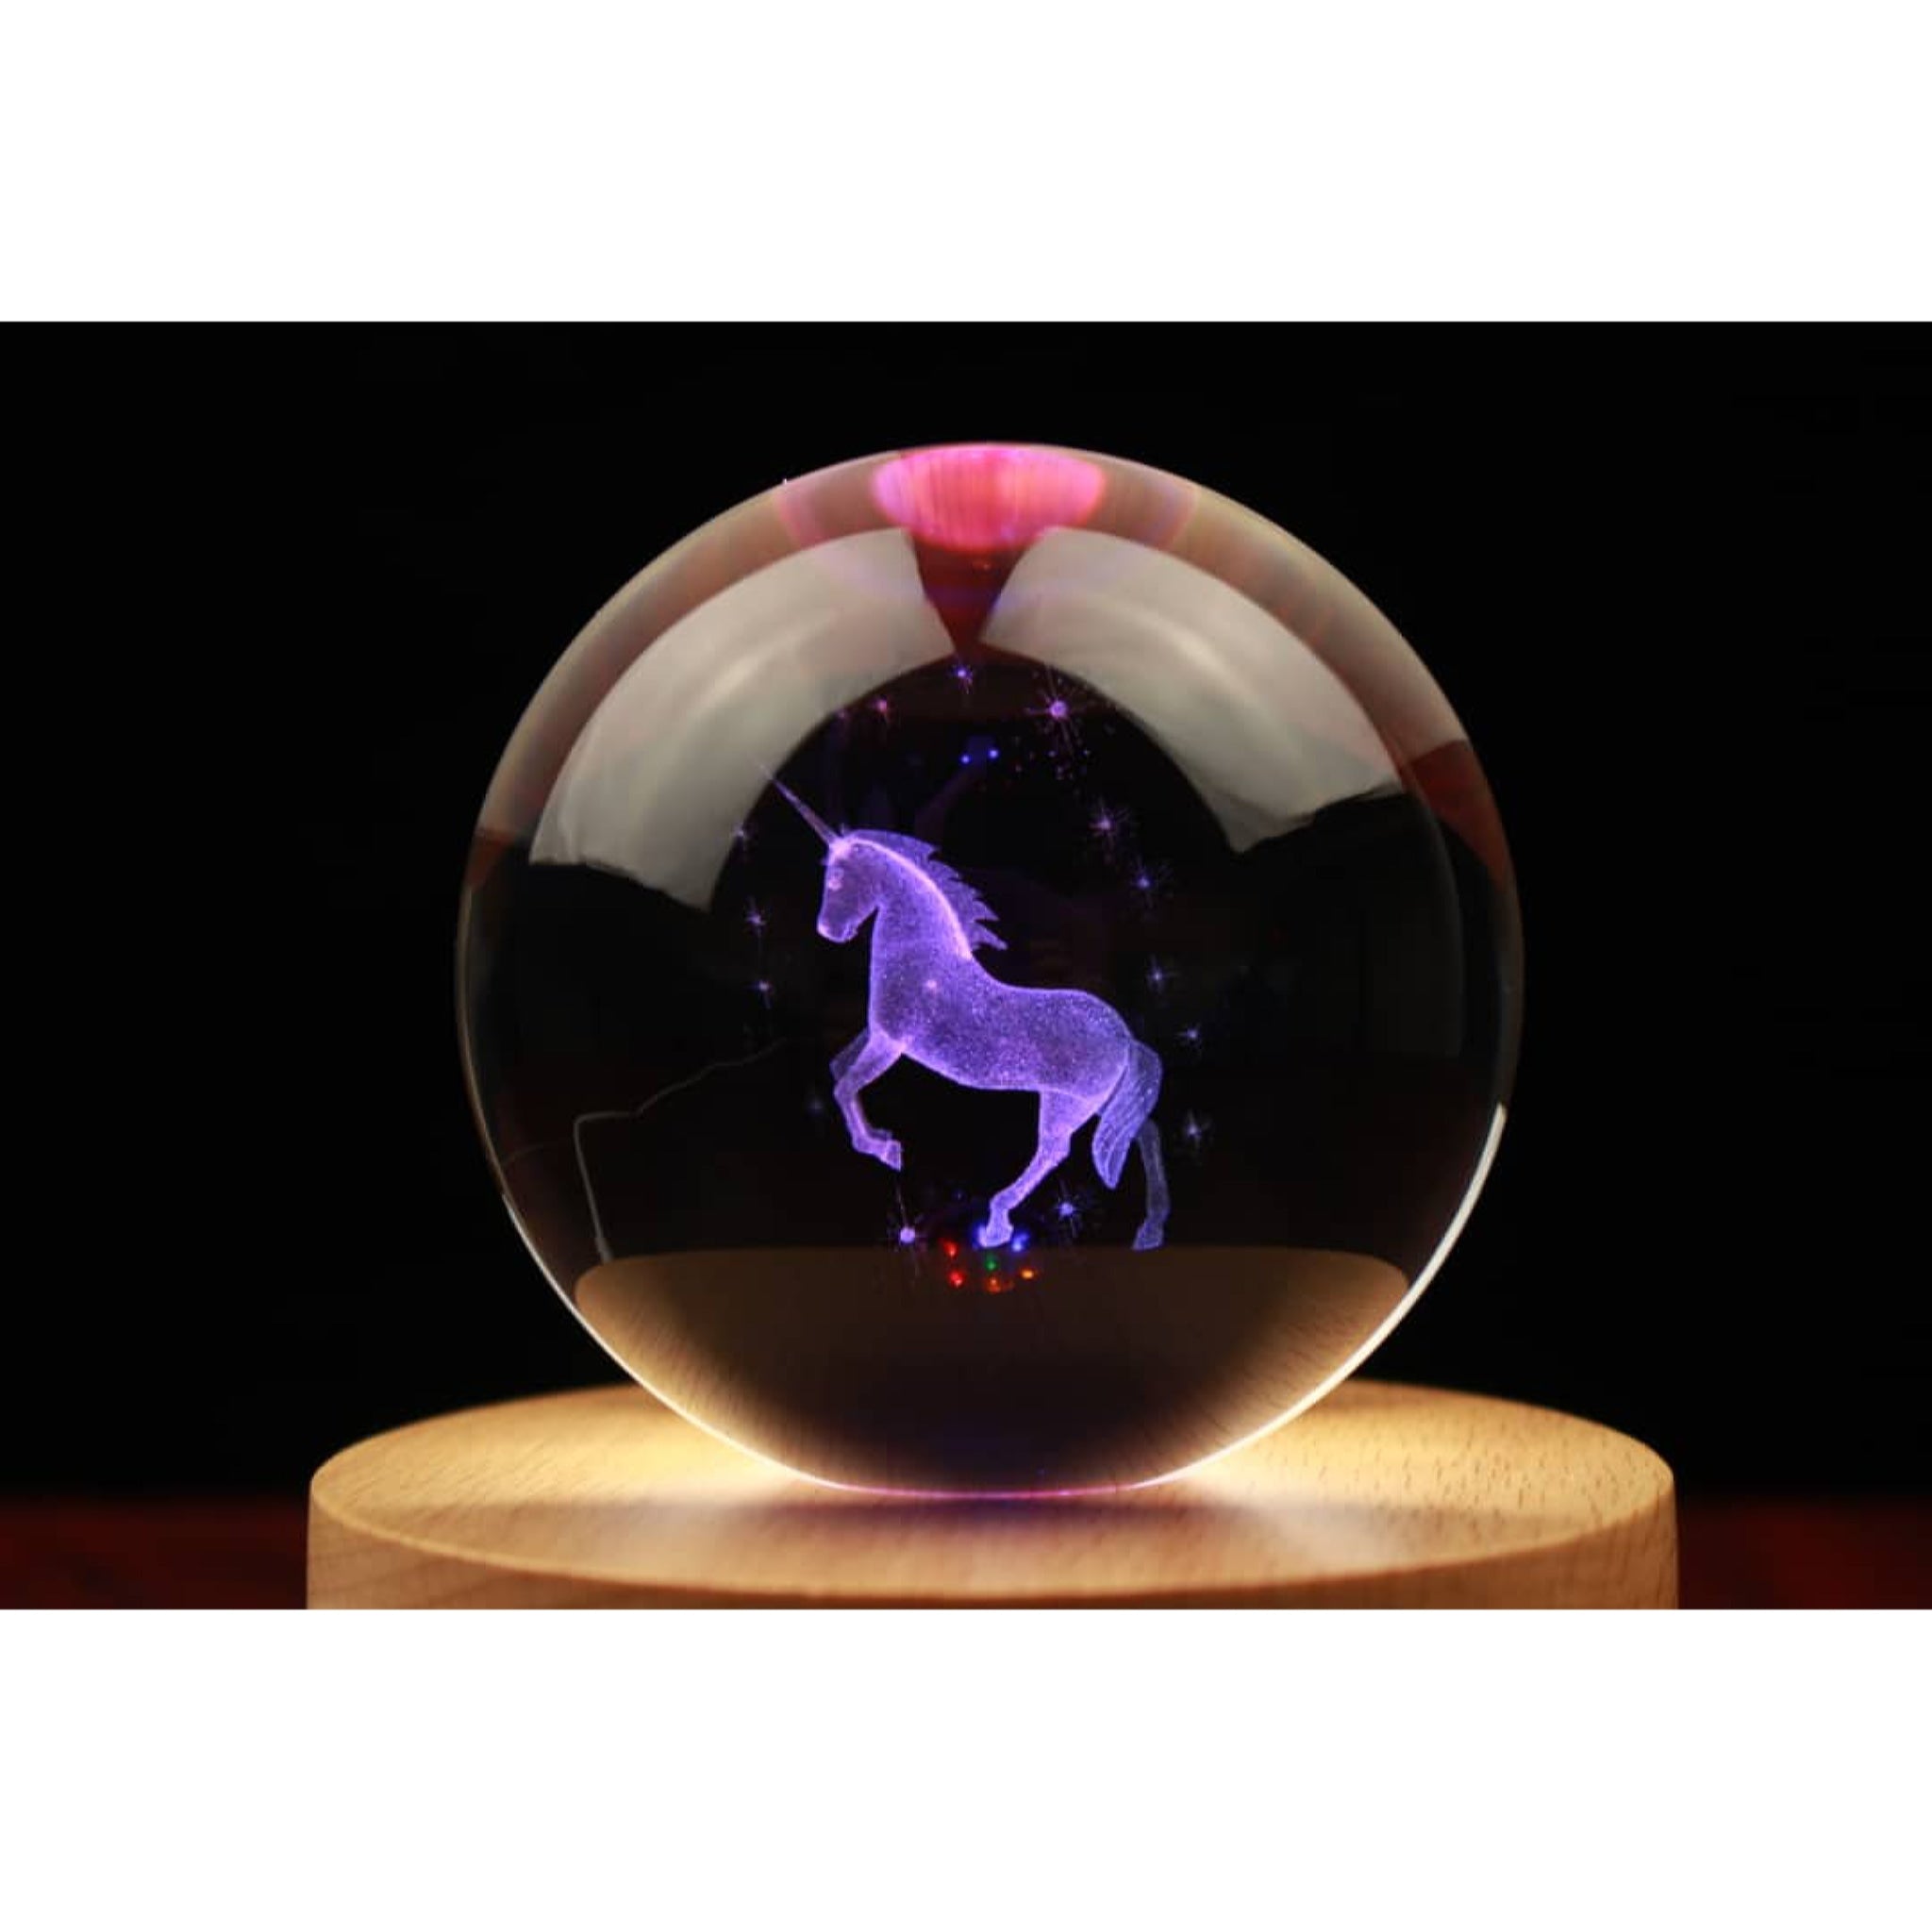 Unicorn Character Glass Crystal Ball 57 with Light-Up LED Base Ornament 80mm XL Size